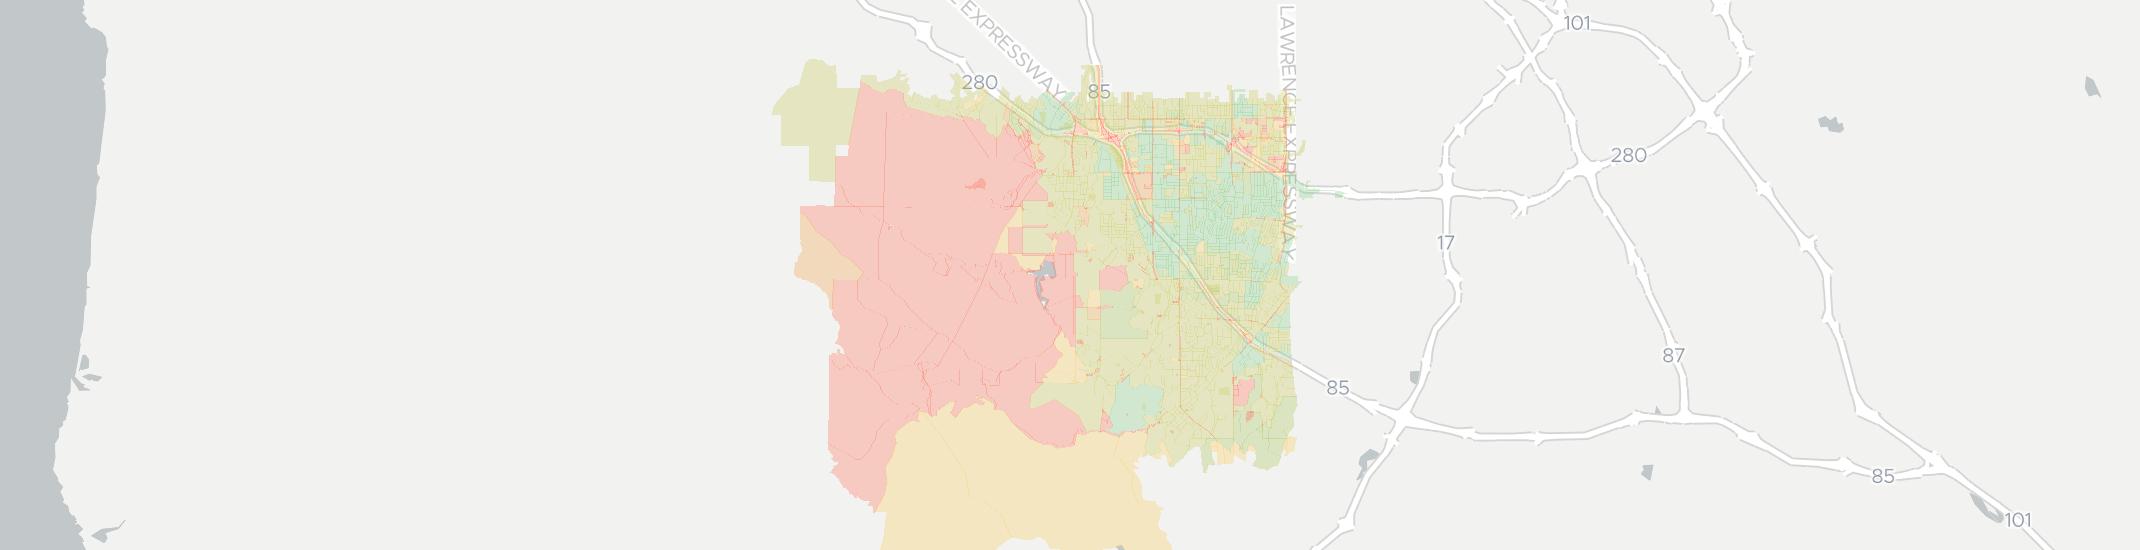 Cupertino Internet Competition Map. Click for interactive map.